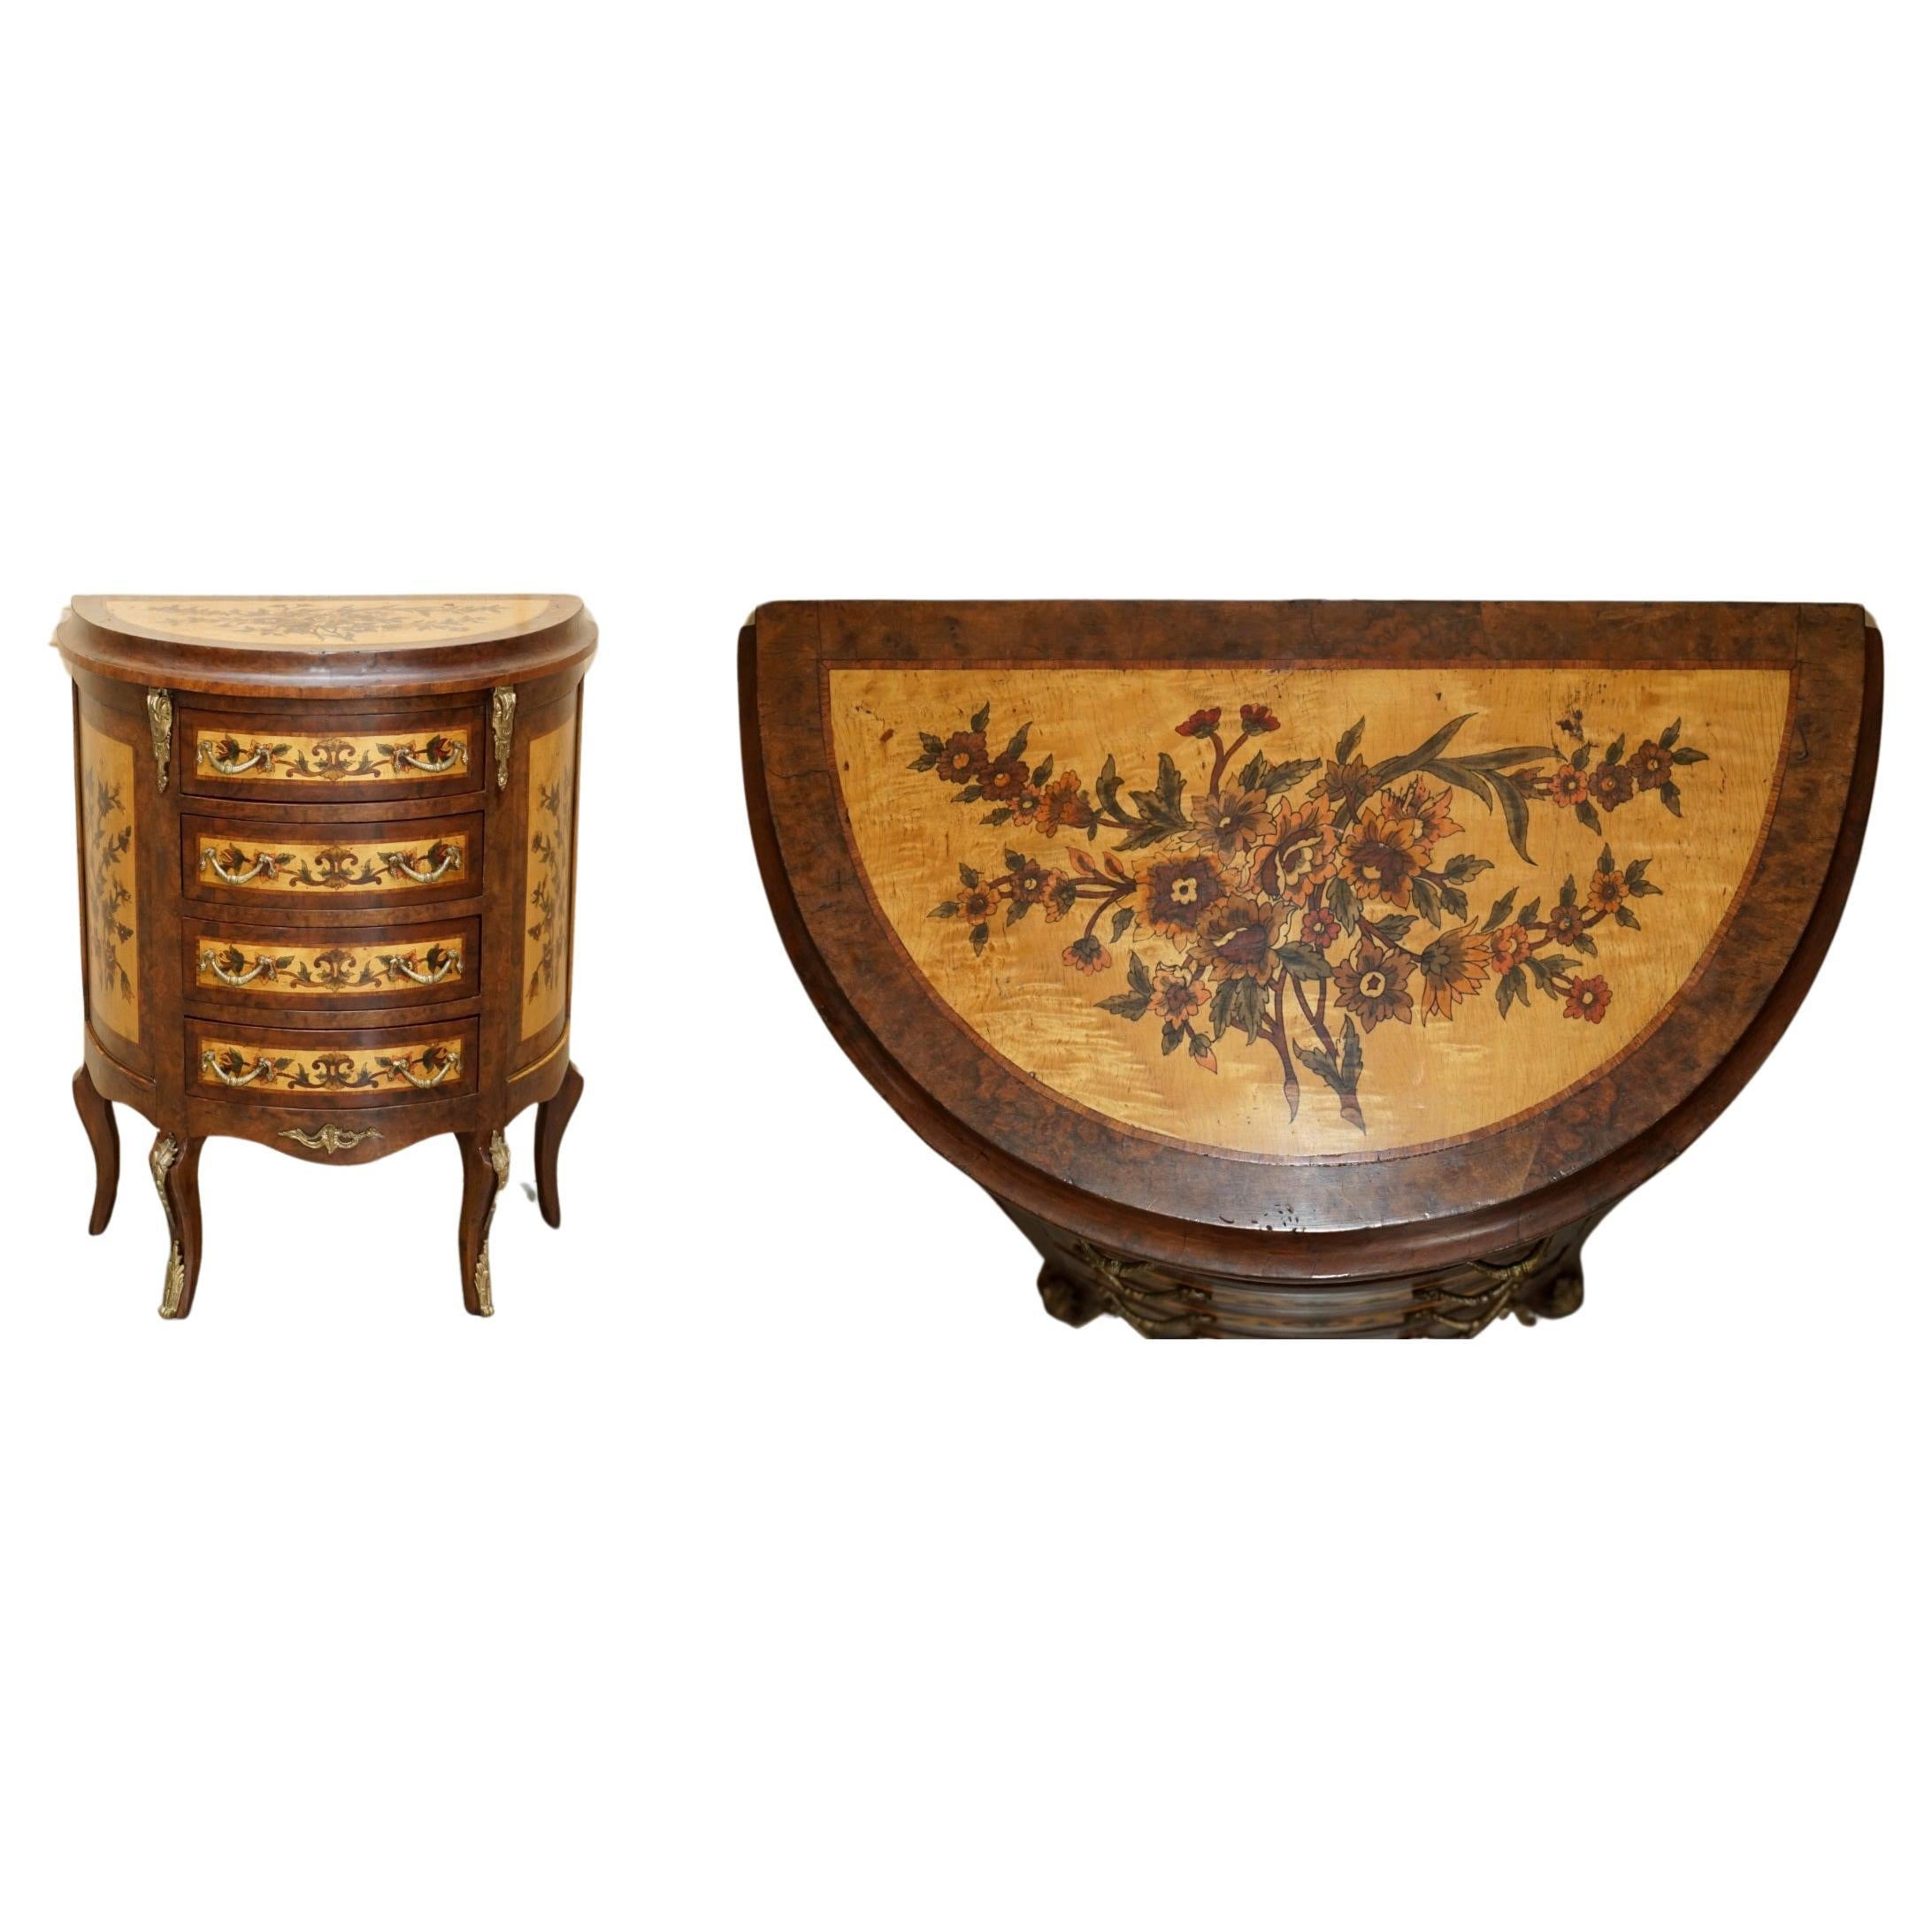 LOVELY FRENCH ViNTAGE PAINTED CIRCA 1940'S BURR WALNUT BRASS DEMI LUNE DRAWERS For Sale